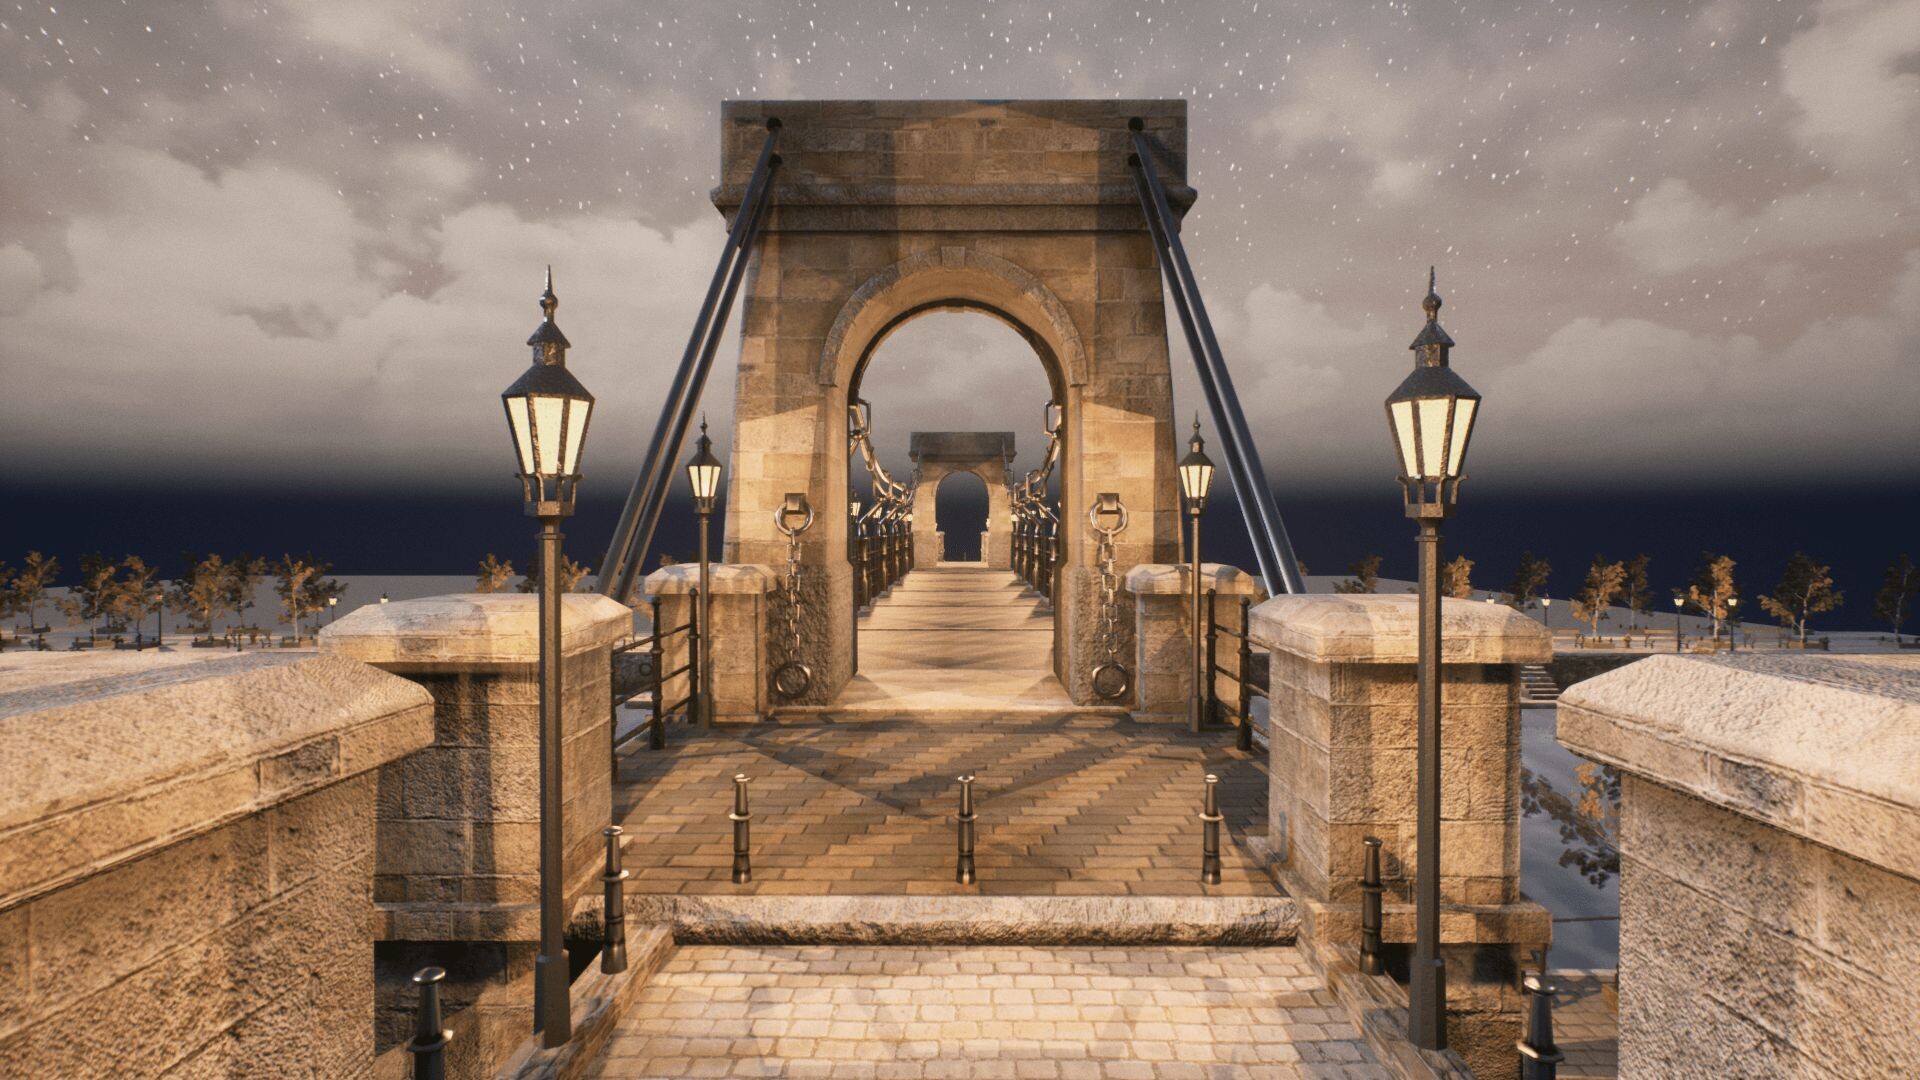 An image showing Bridges asset pack, created with Unreal Engine 4.